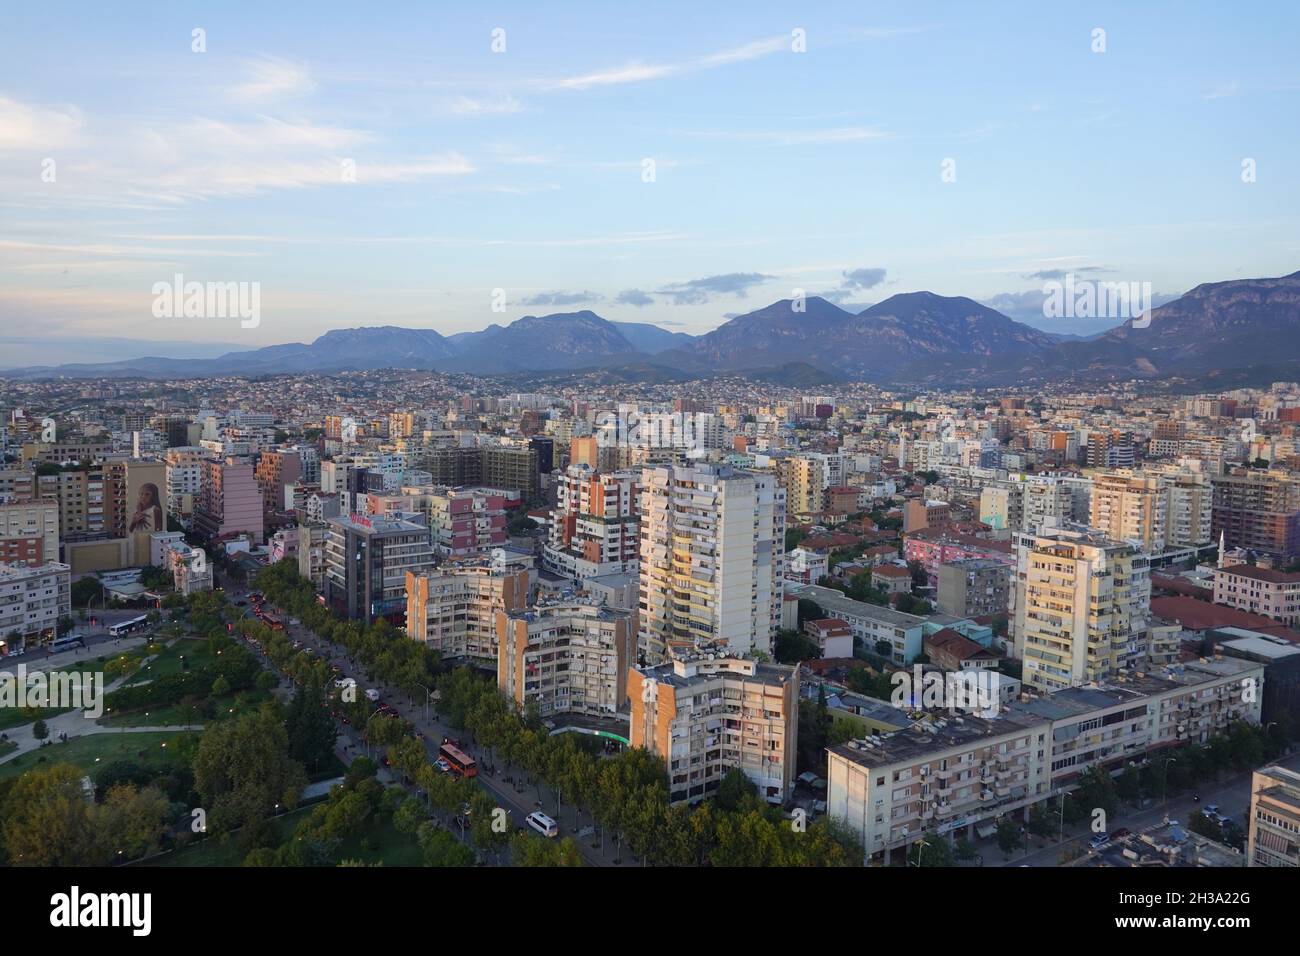 Aerial view of Tirana, capital of Albania with mountains in background Stock Photo